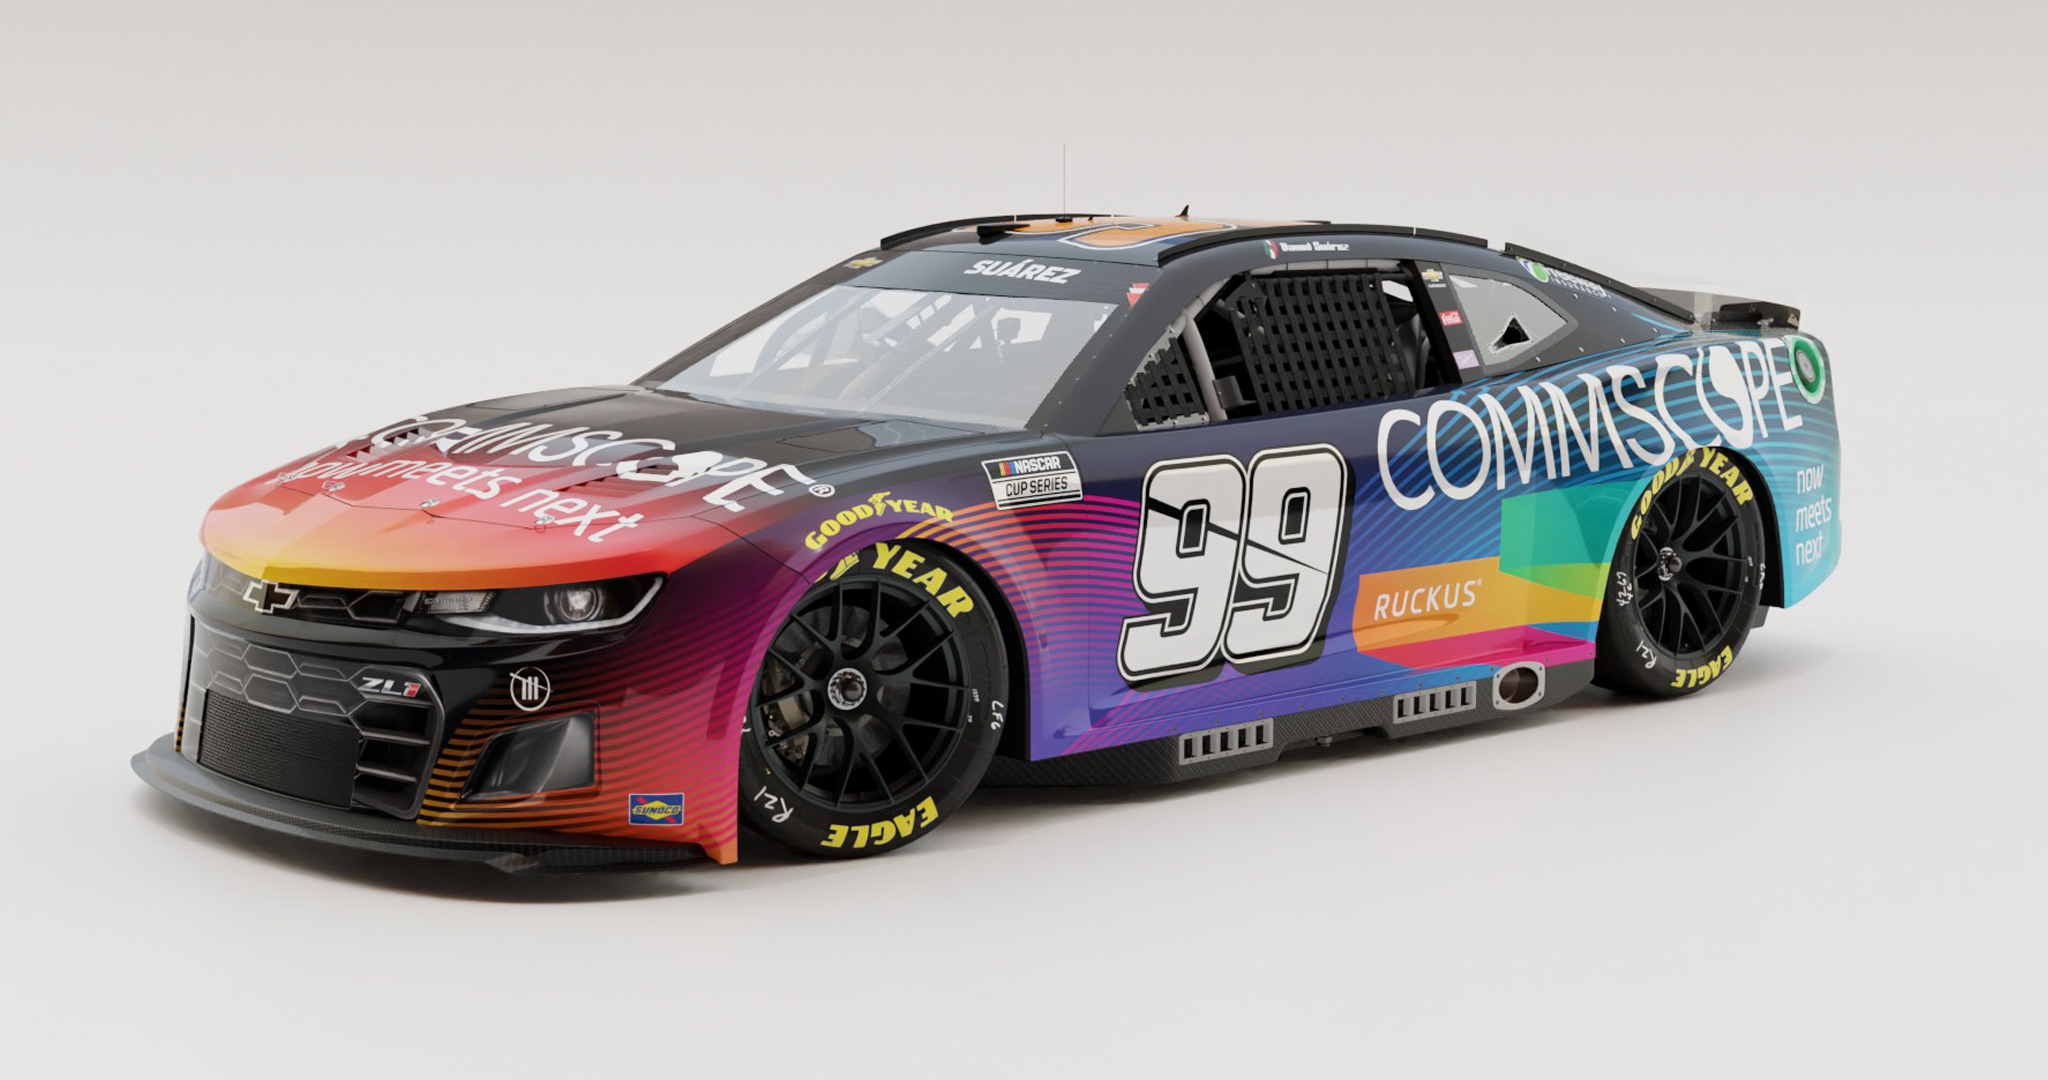 CommScope Returns to Trackhouse Racing in 2022